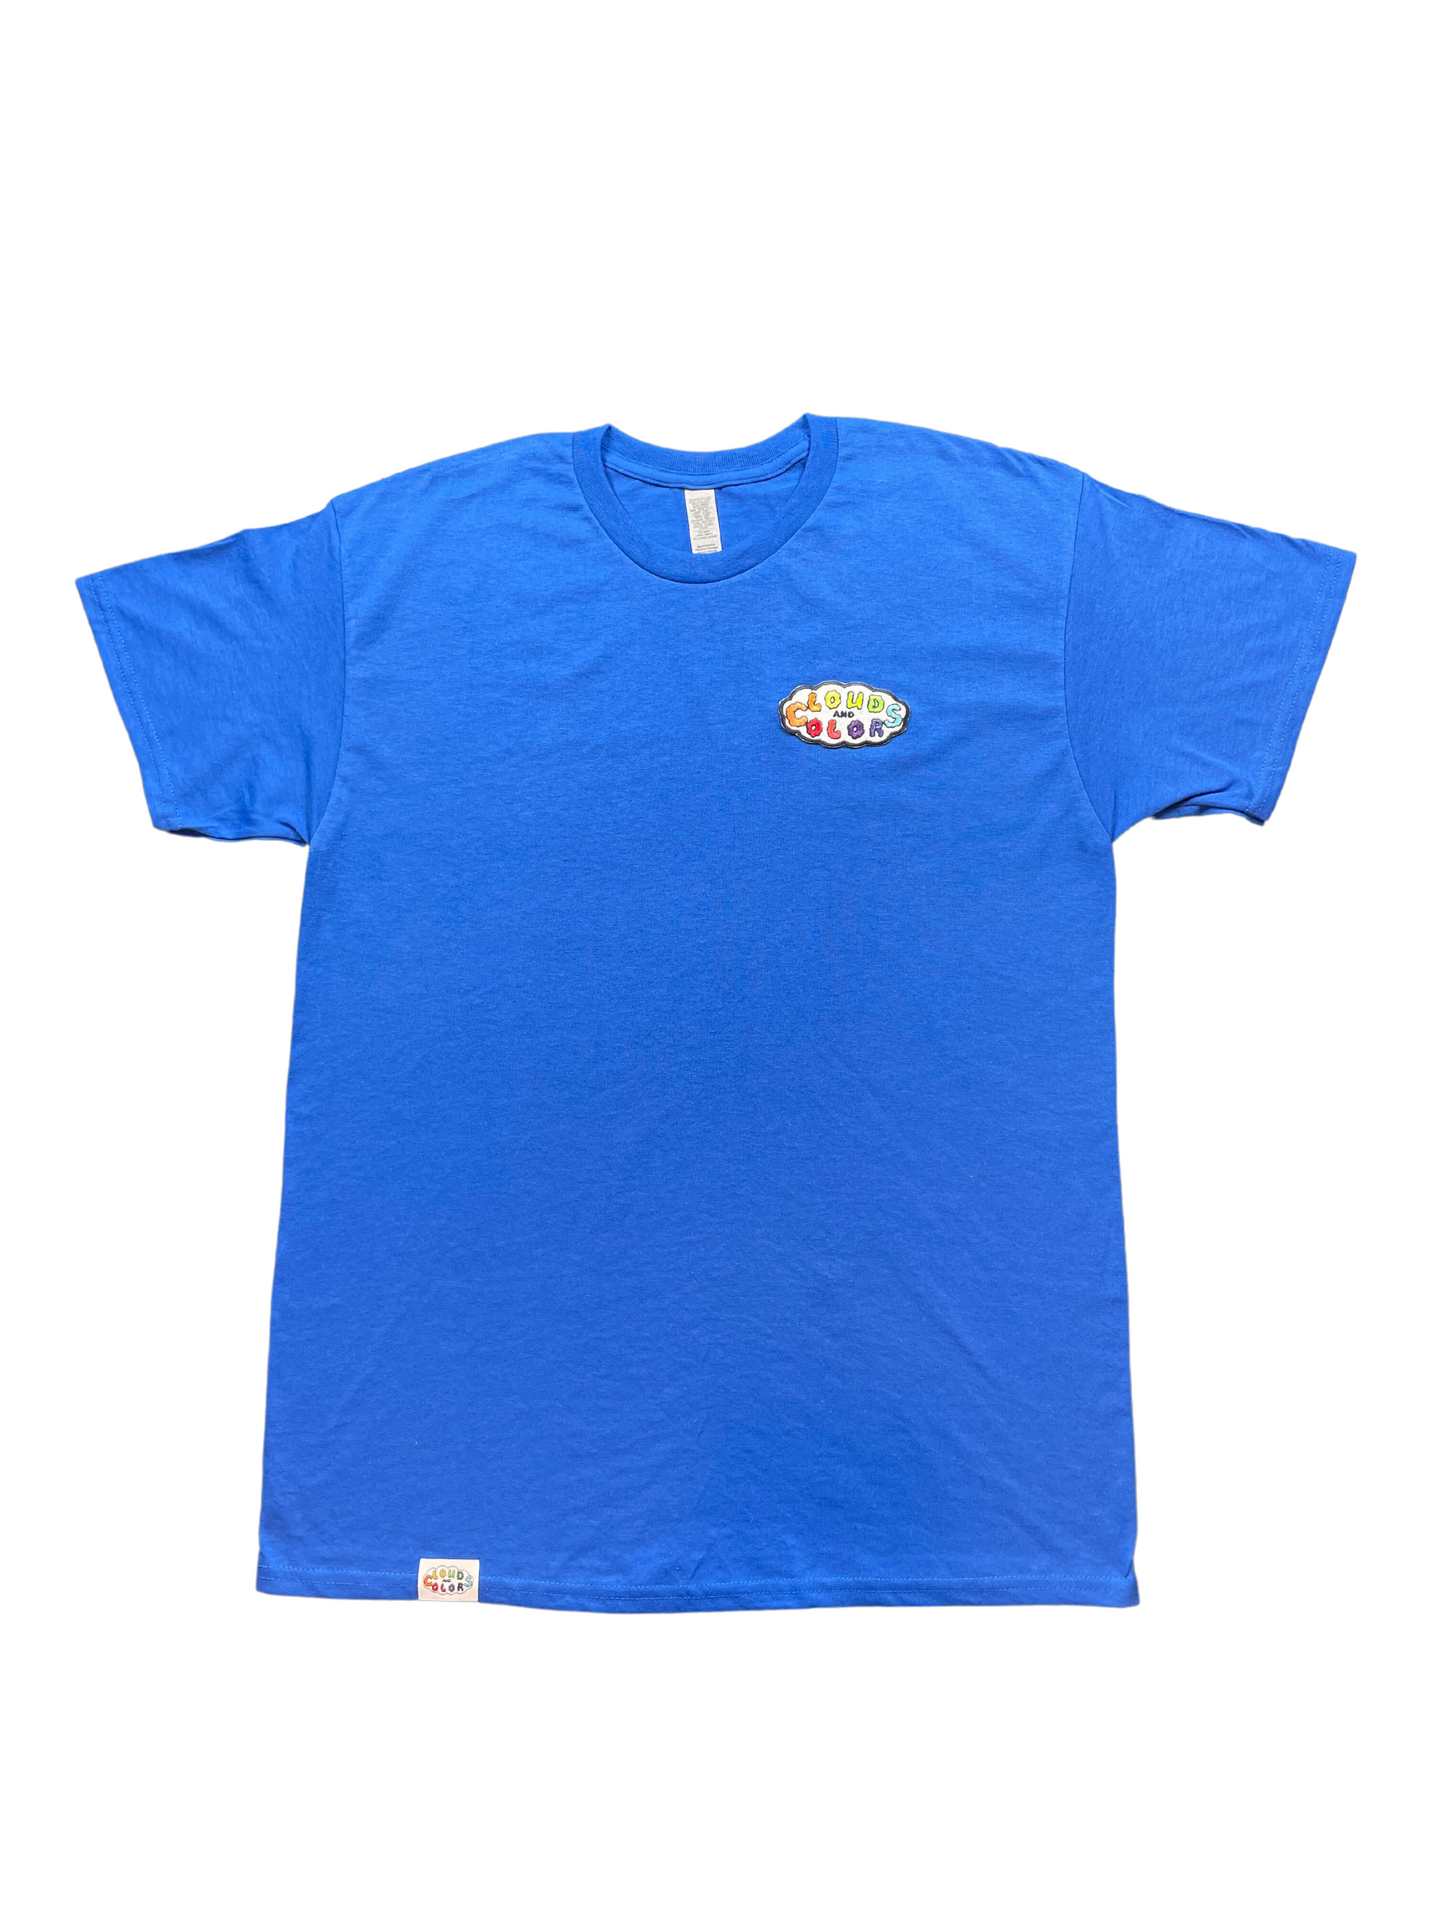 Clouds and Colors Short Sleeve Logo T Shirt - Clouds and Colors Clothing